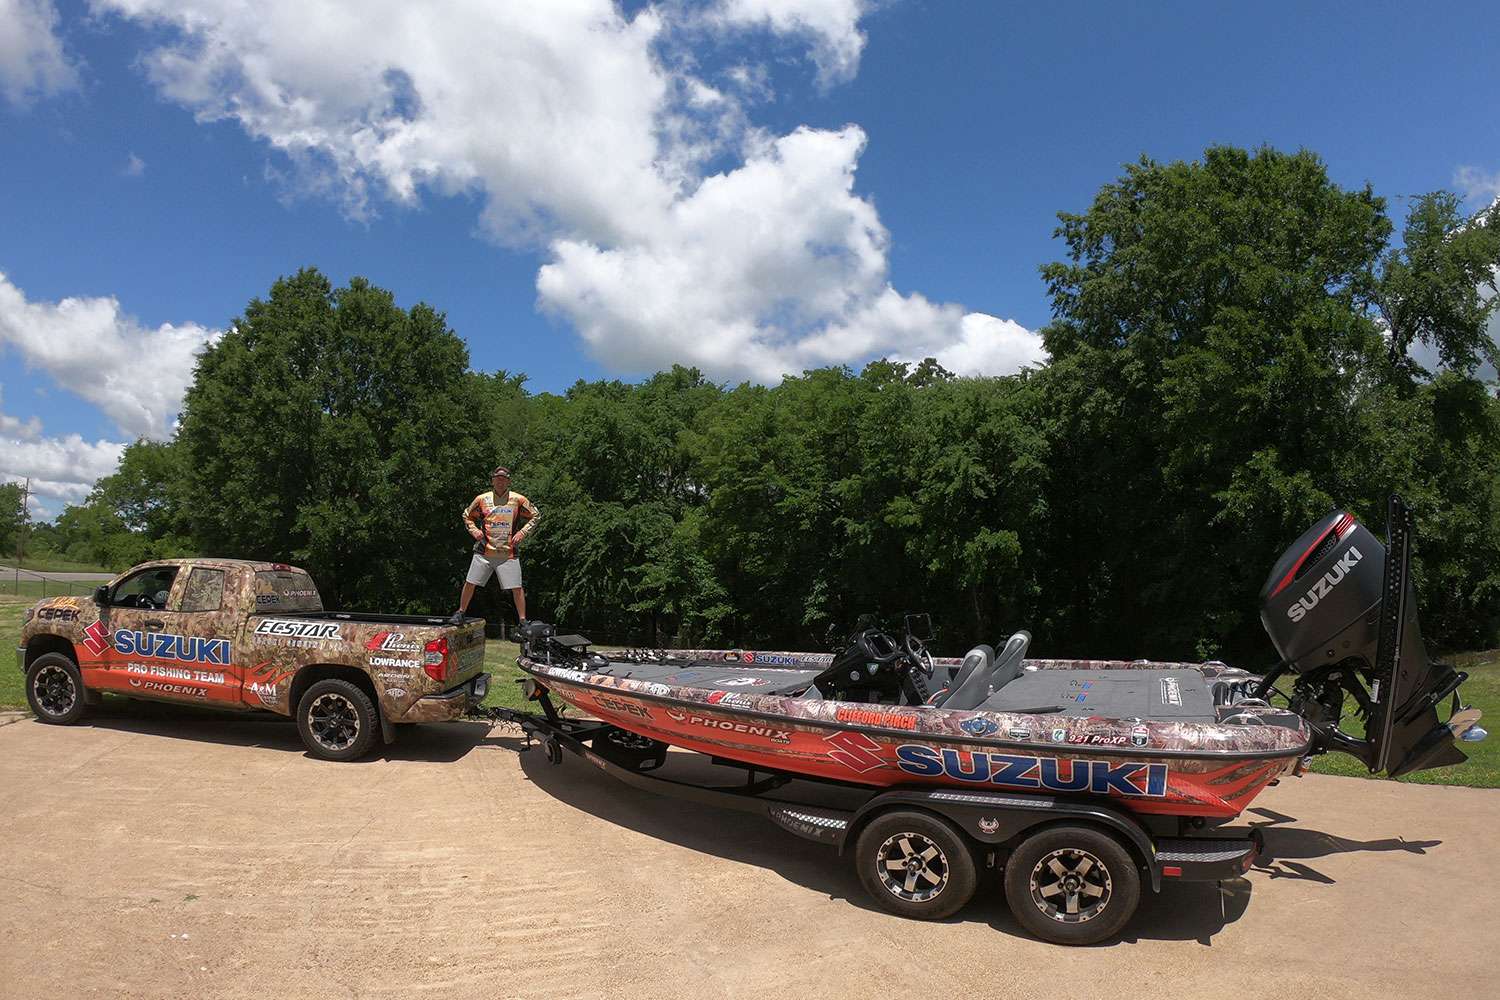 Pirch's tow vehicle is a Toyota Tacoma rigged with Dick Cepek tires, and his wrap is one of the sharpest on tour -- you can pick him out across the lake.